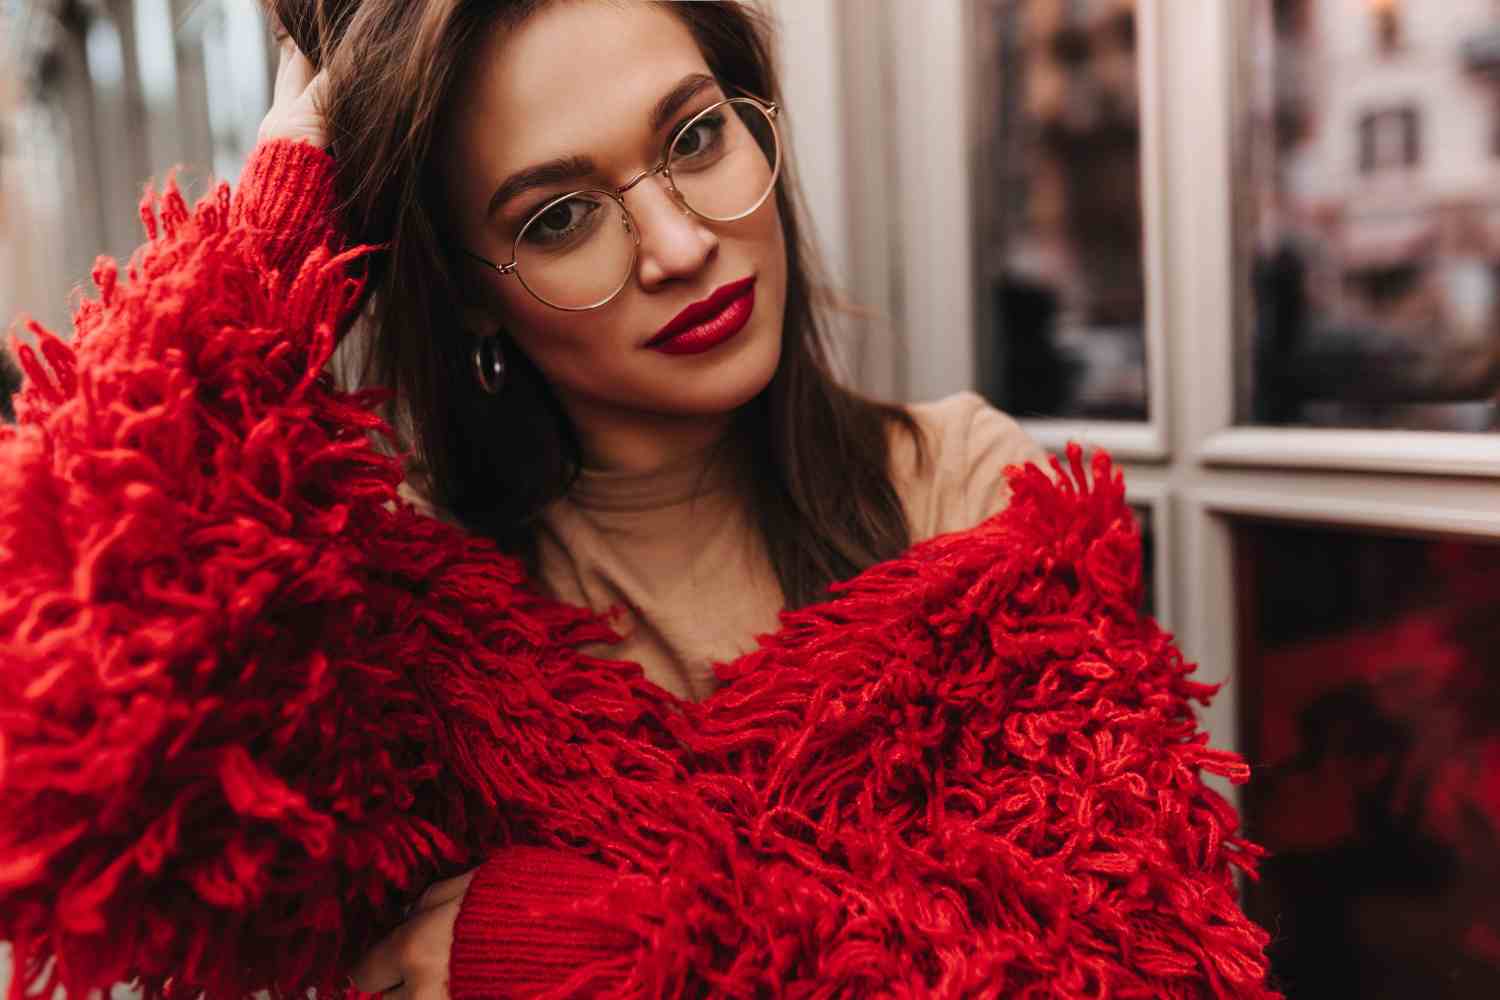 attractive brown eyed brunette woman with red lipstick dressed bright knitted jacket beige top looking into camera through glasses against windows